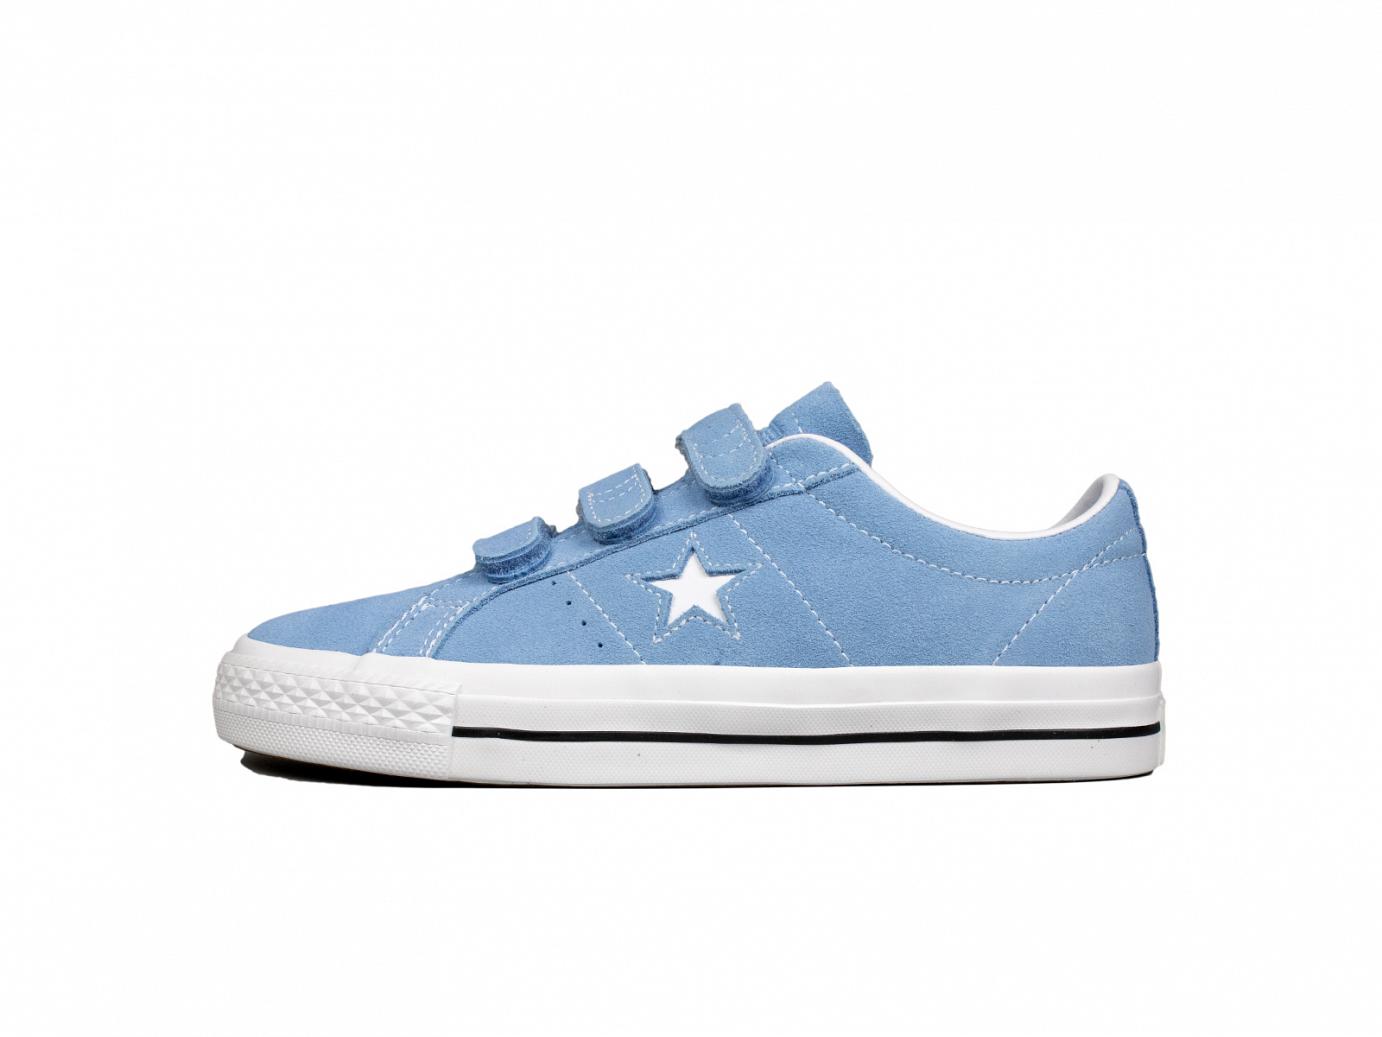 converse one star pro 3v suede low top